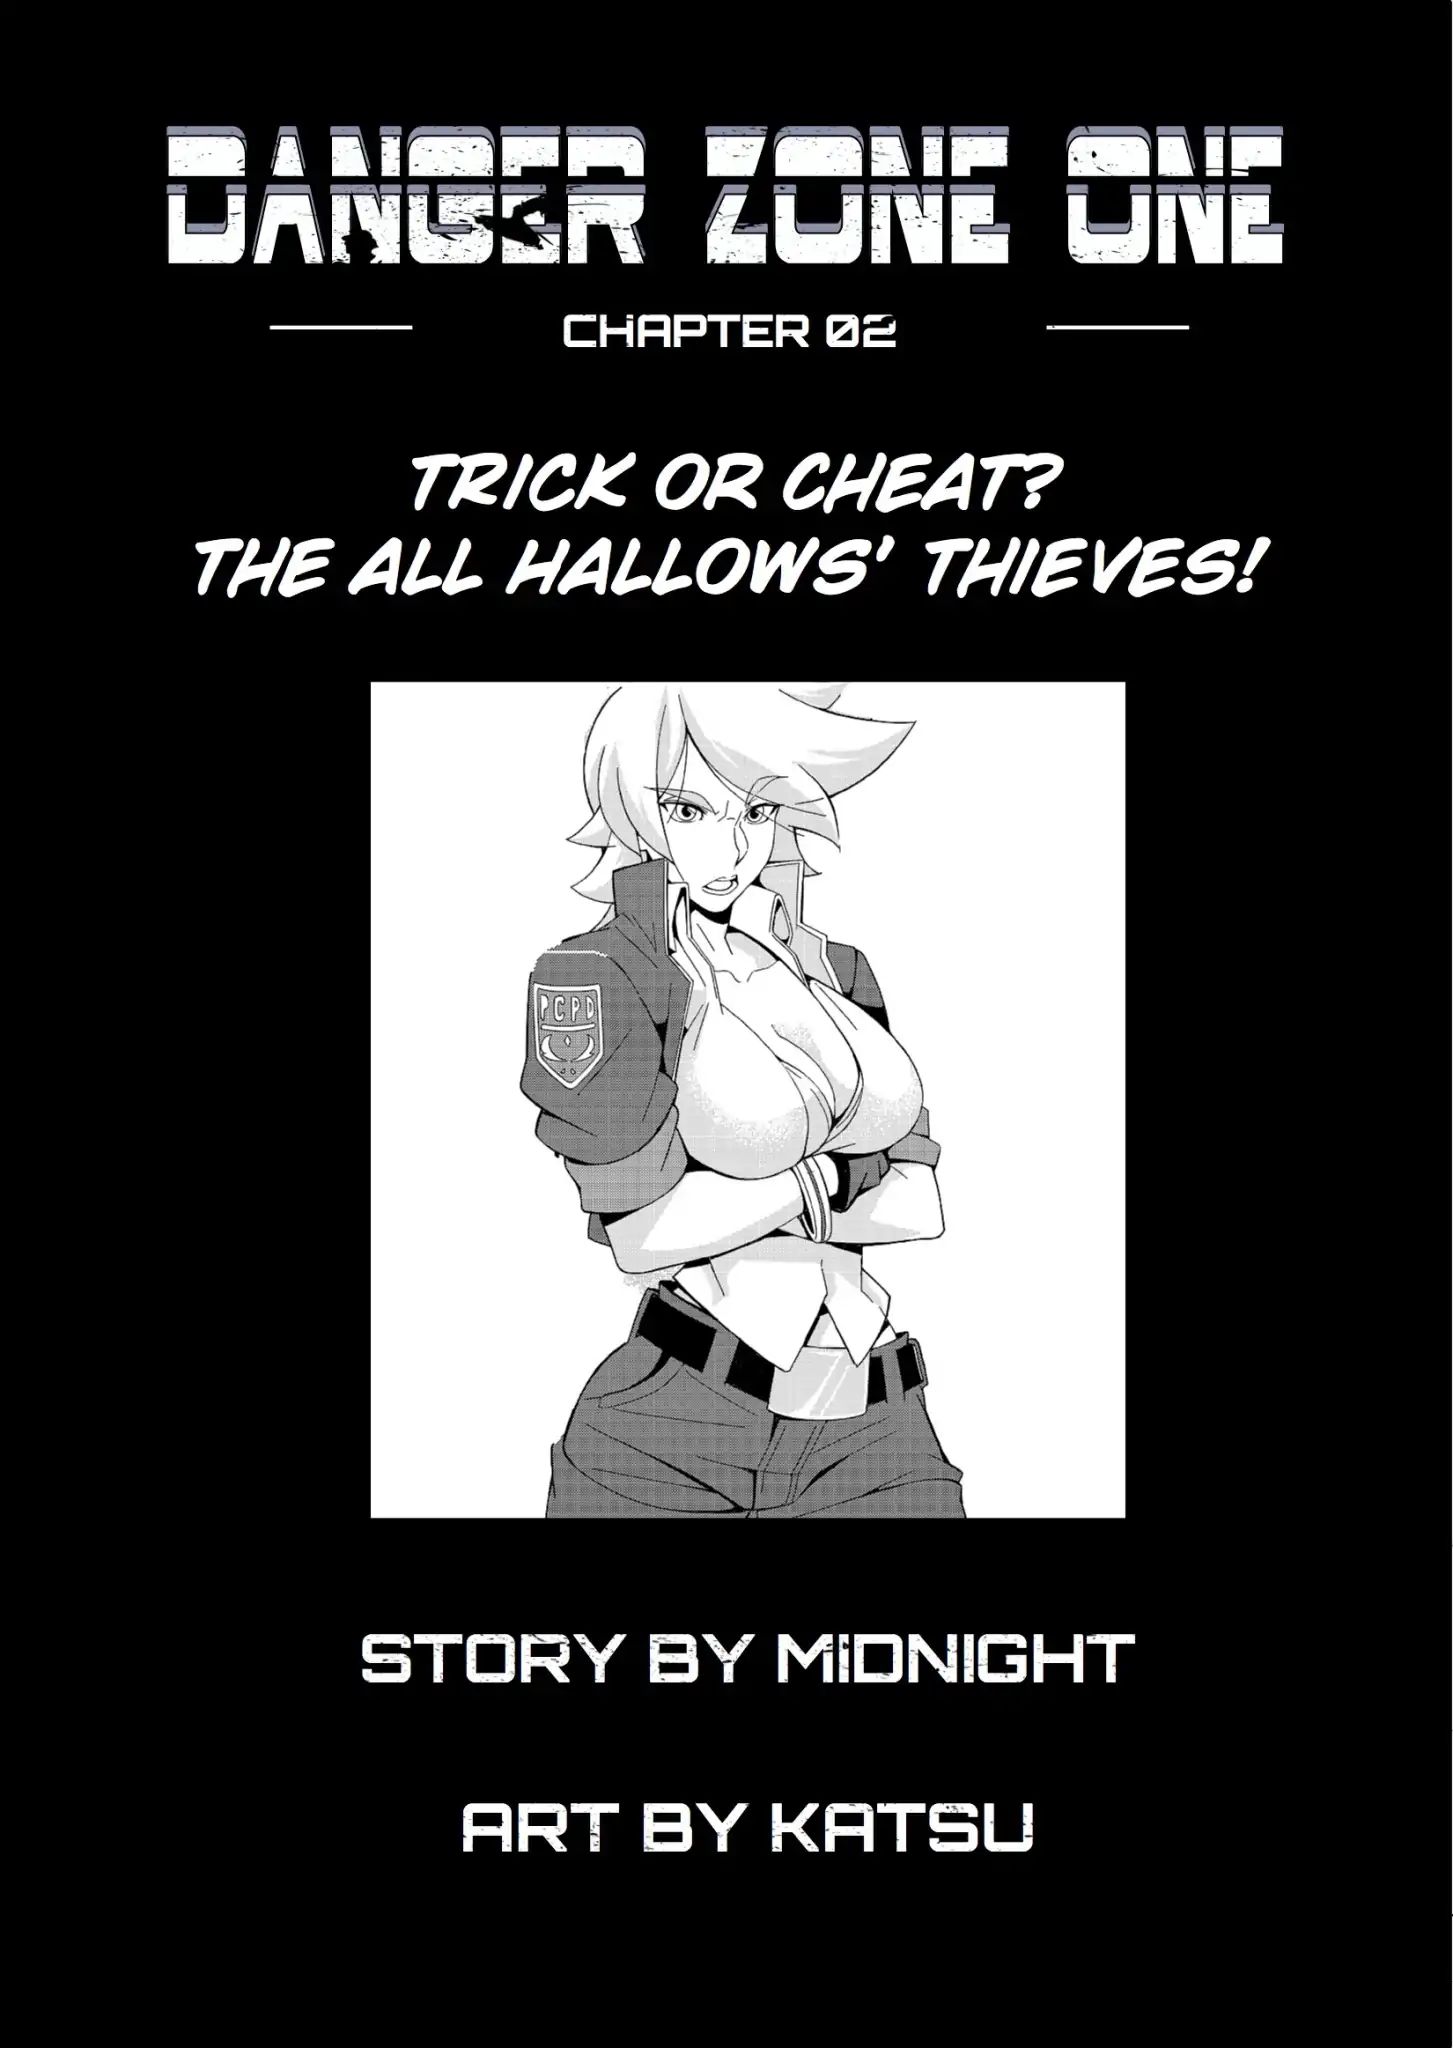 Danger Zone One Chapter 02: The All Hallows Thieves! - Picture 2